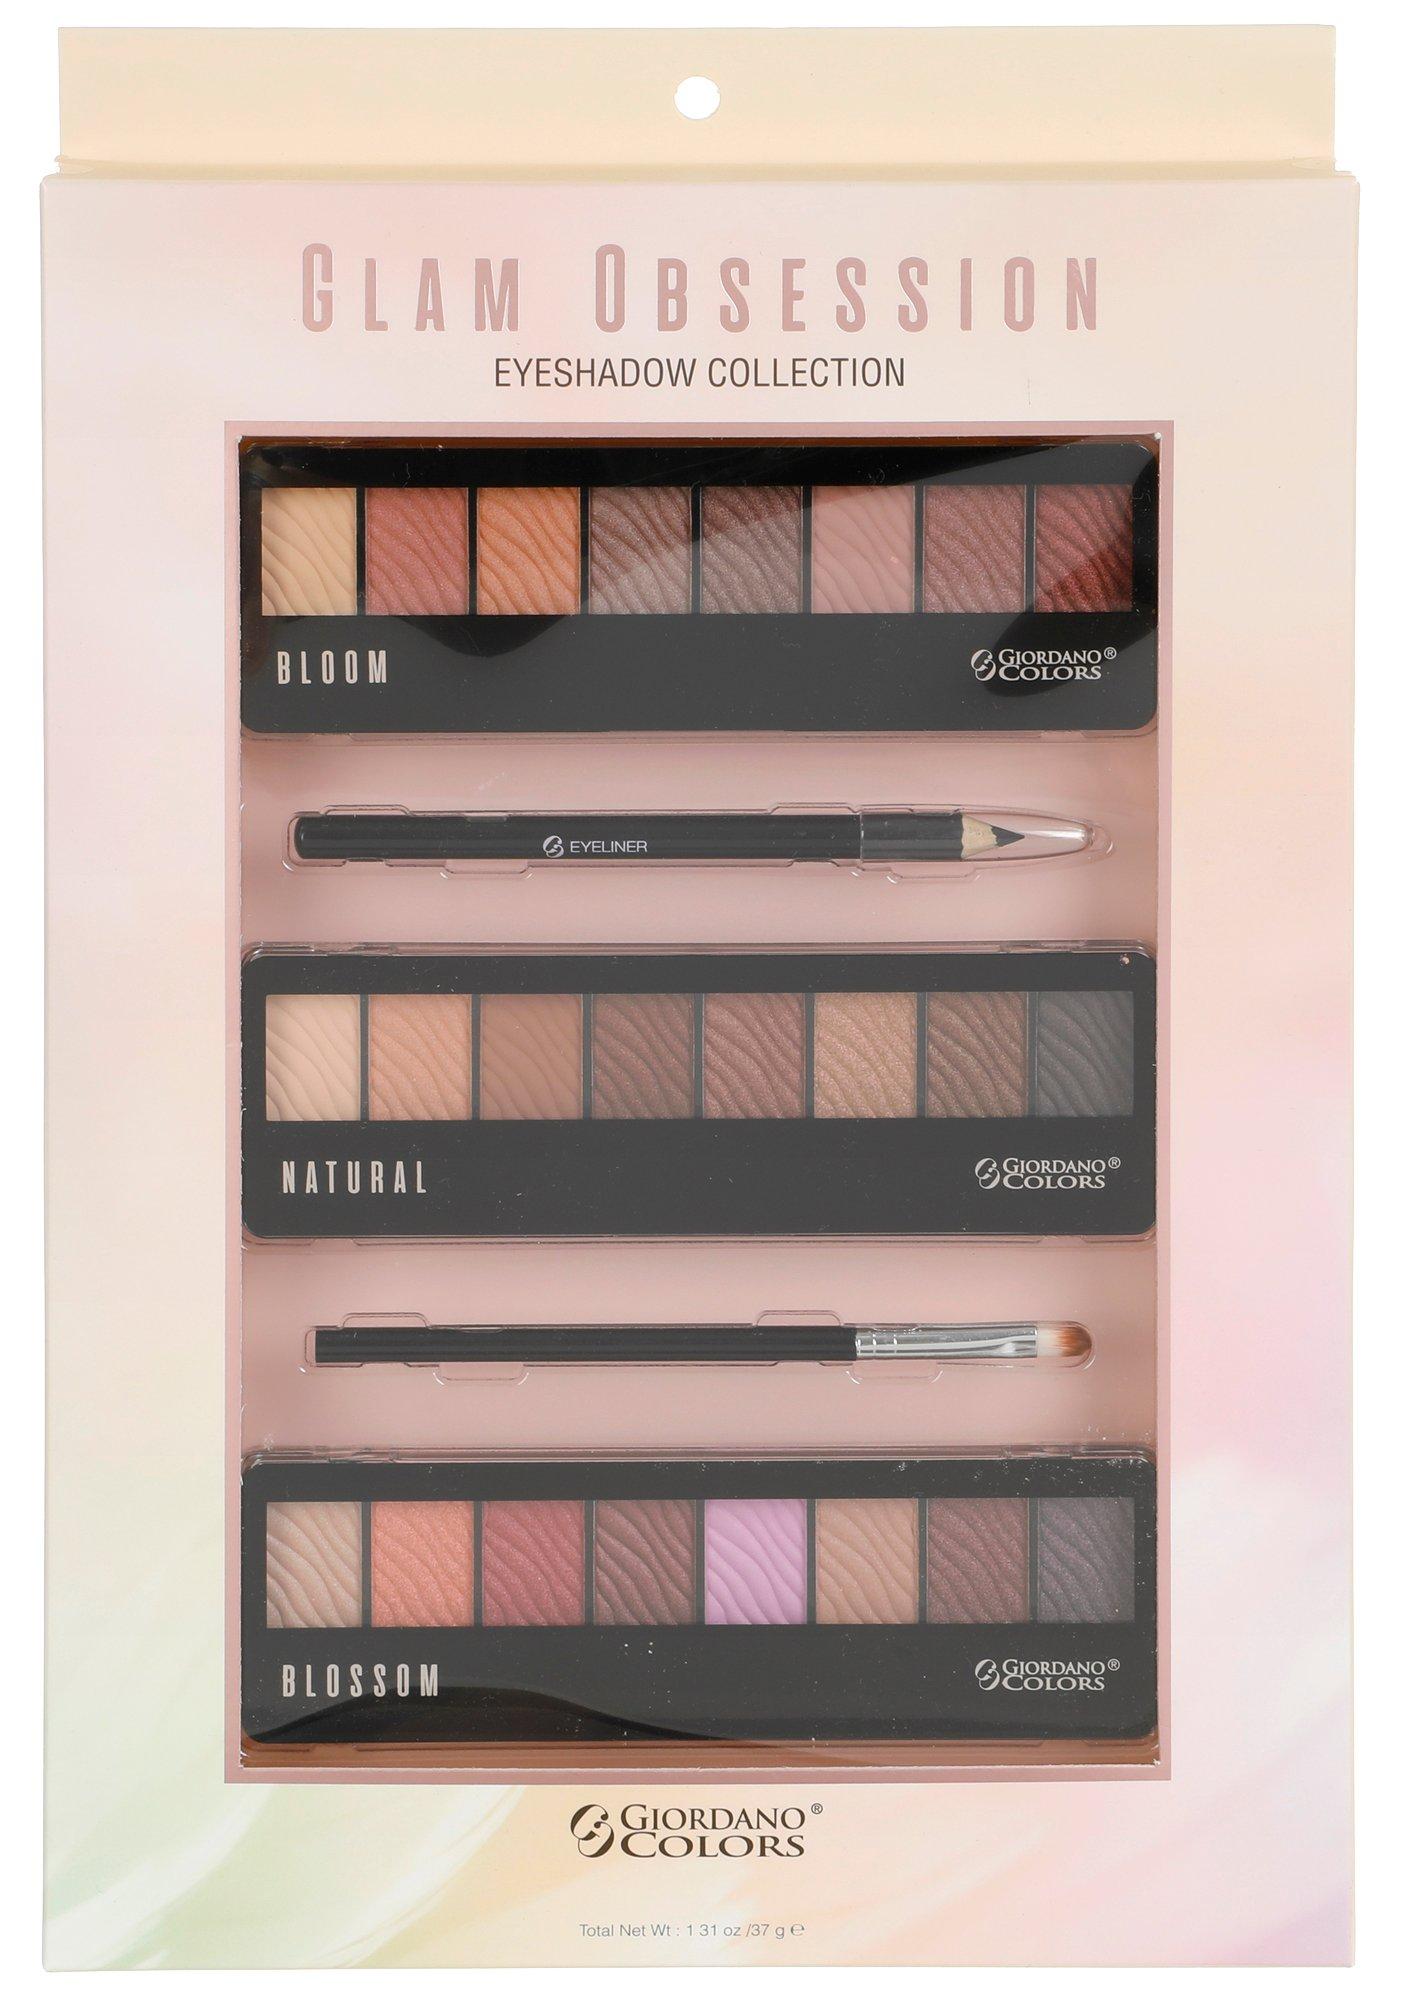 Glam Obsession Eyeshadow Collection